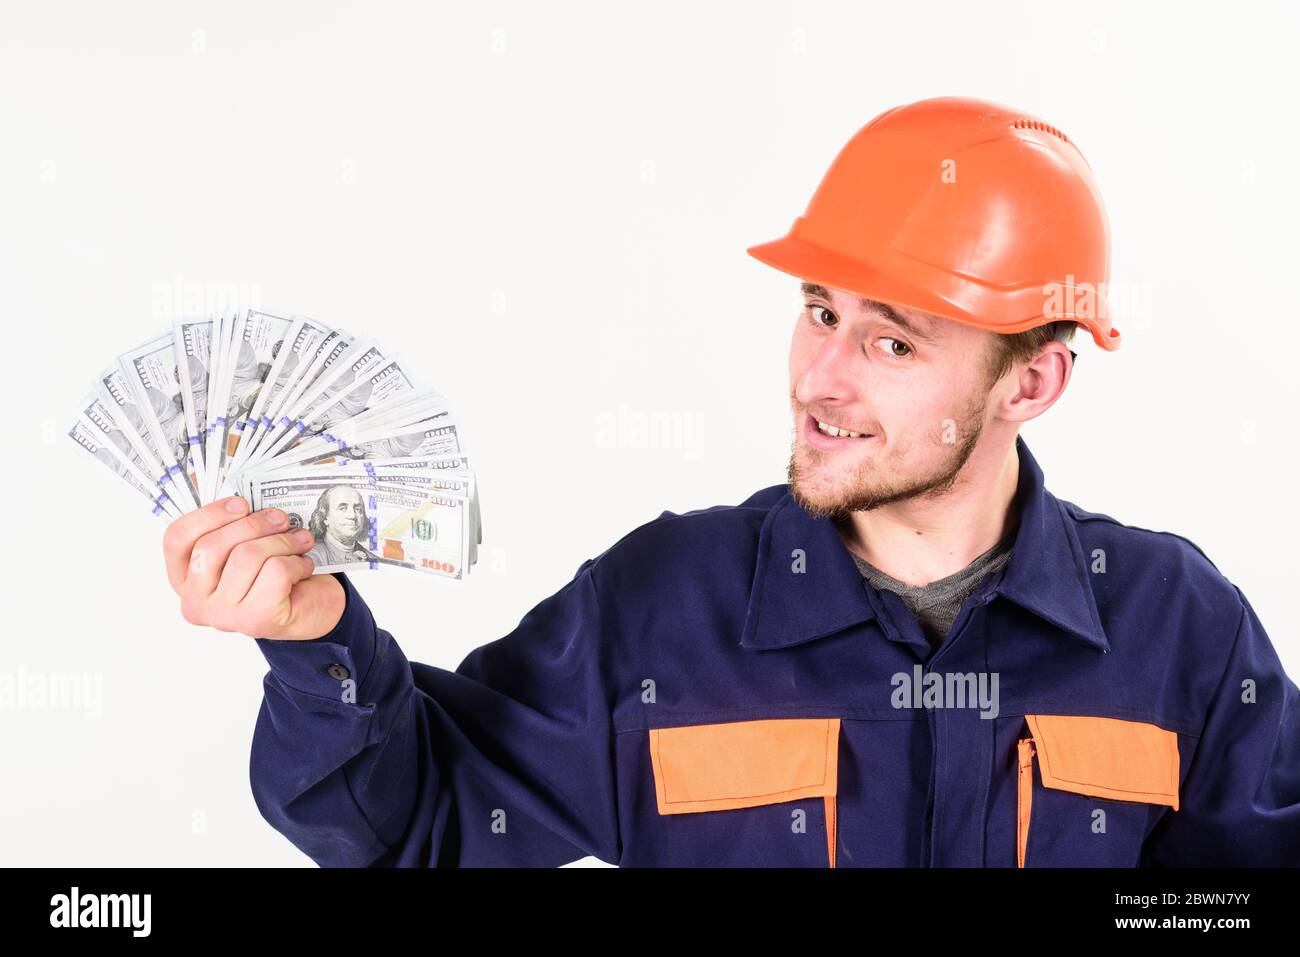 Handyman With Smiling Face In Hard Hat On White Background Man In Helmet Got Salary Money